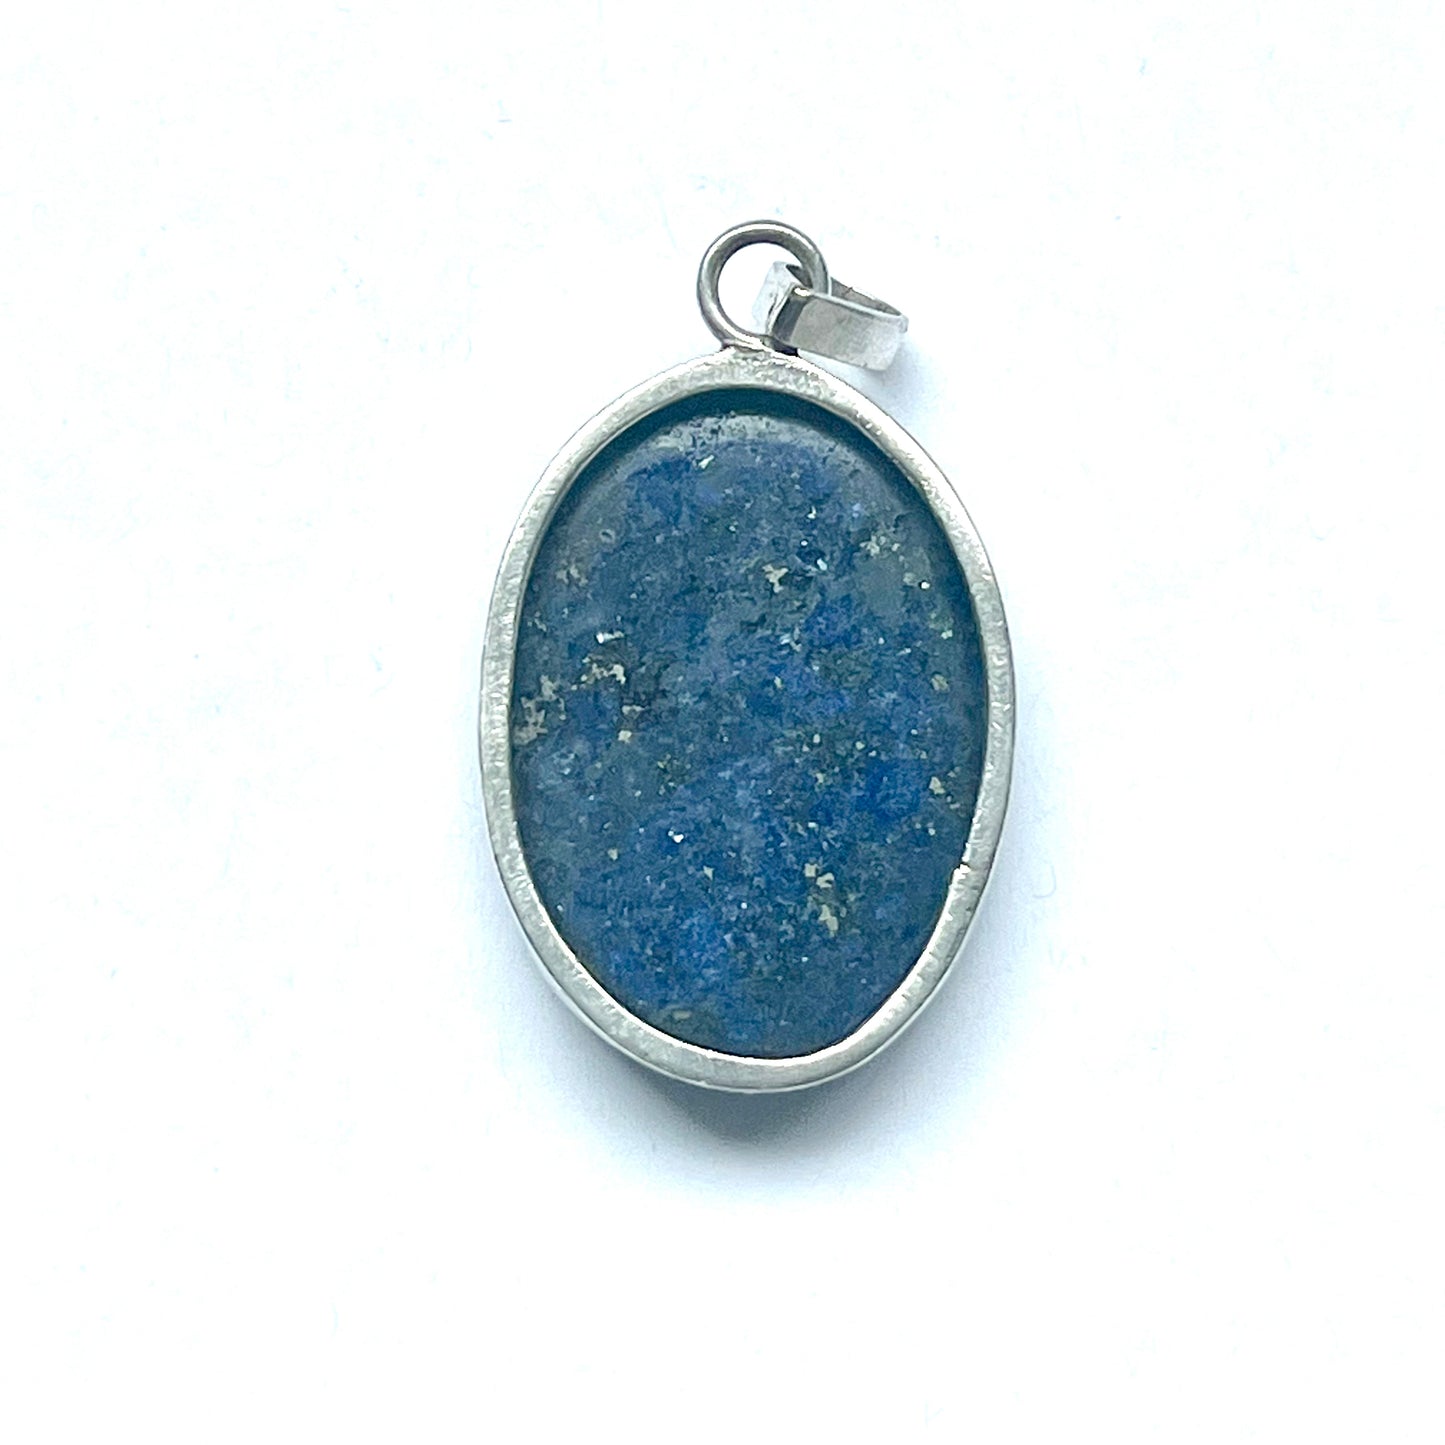 Vintage Sterling Silver and Lapis Lazuli Pendant